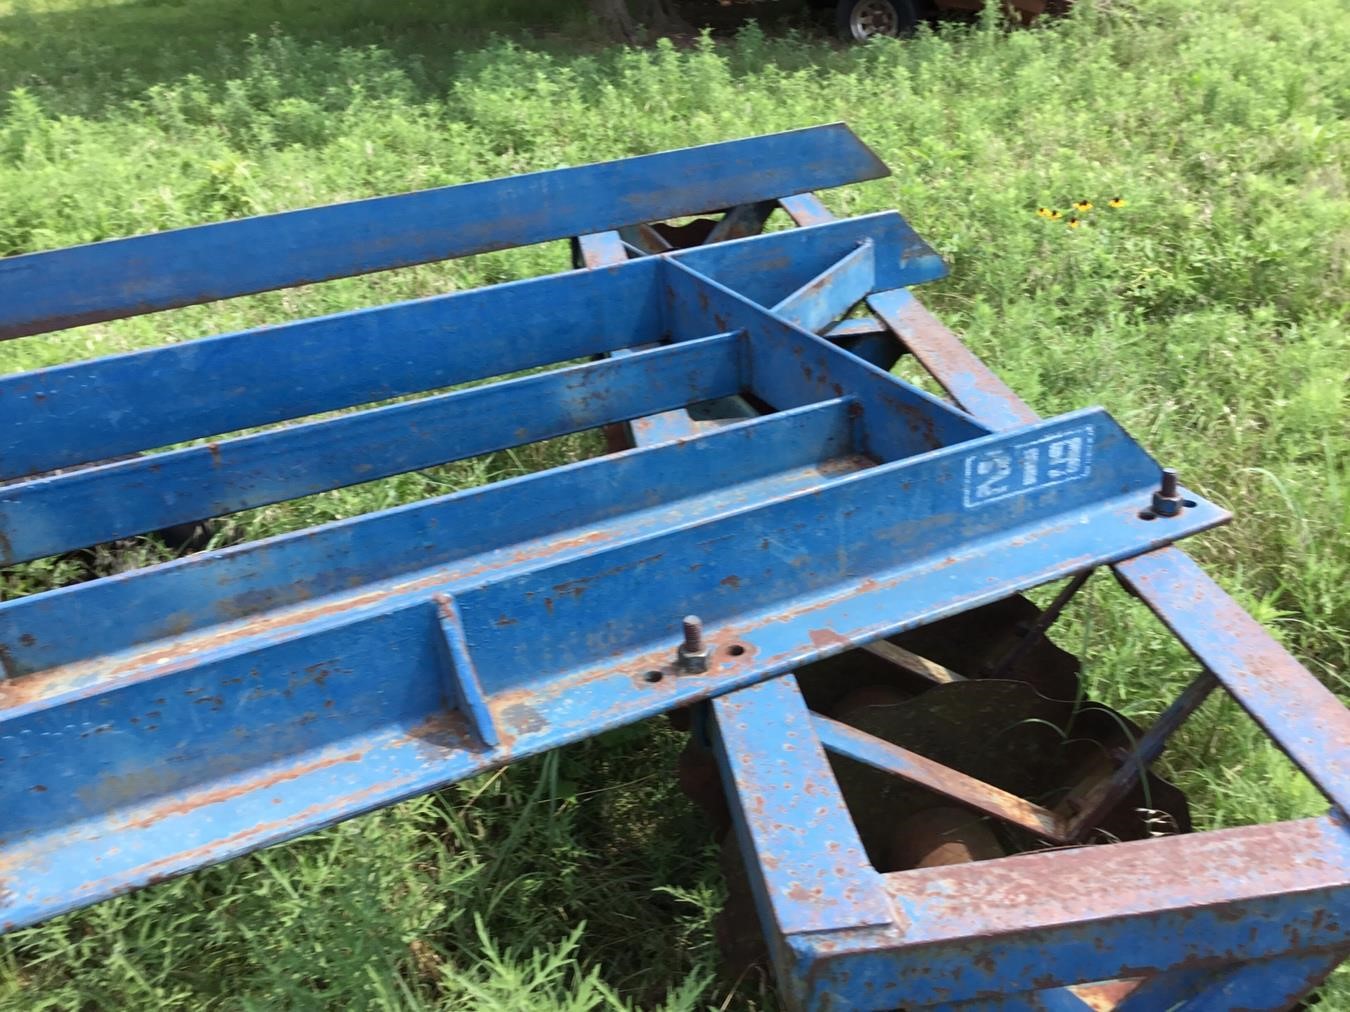 Ford 219 Offset Disk BigIron Auctions